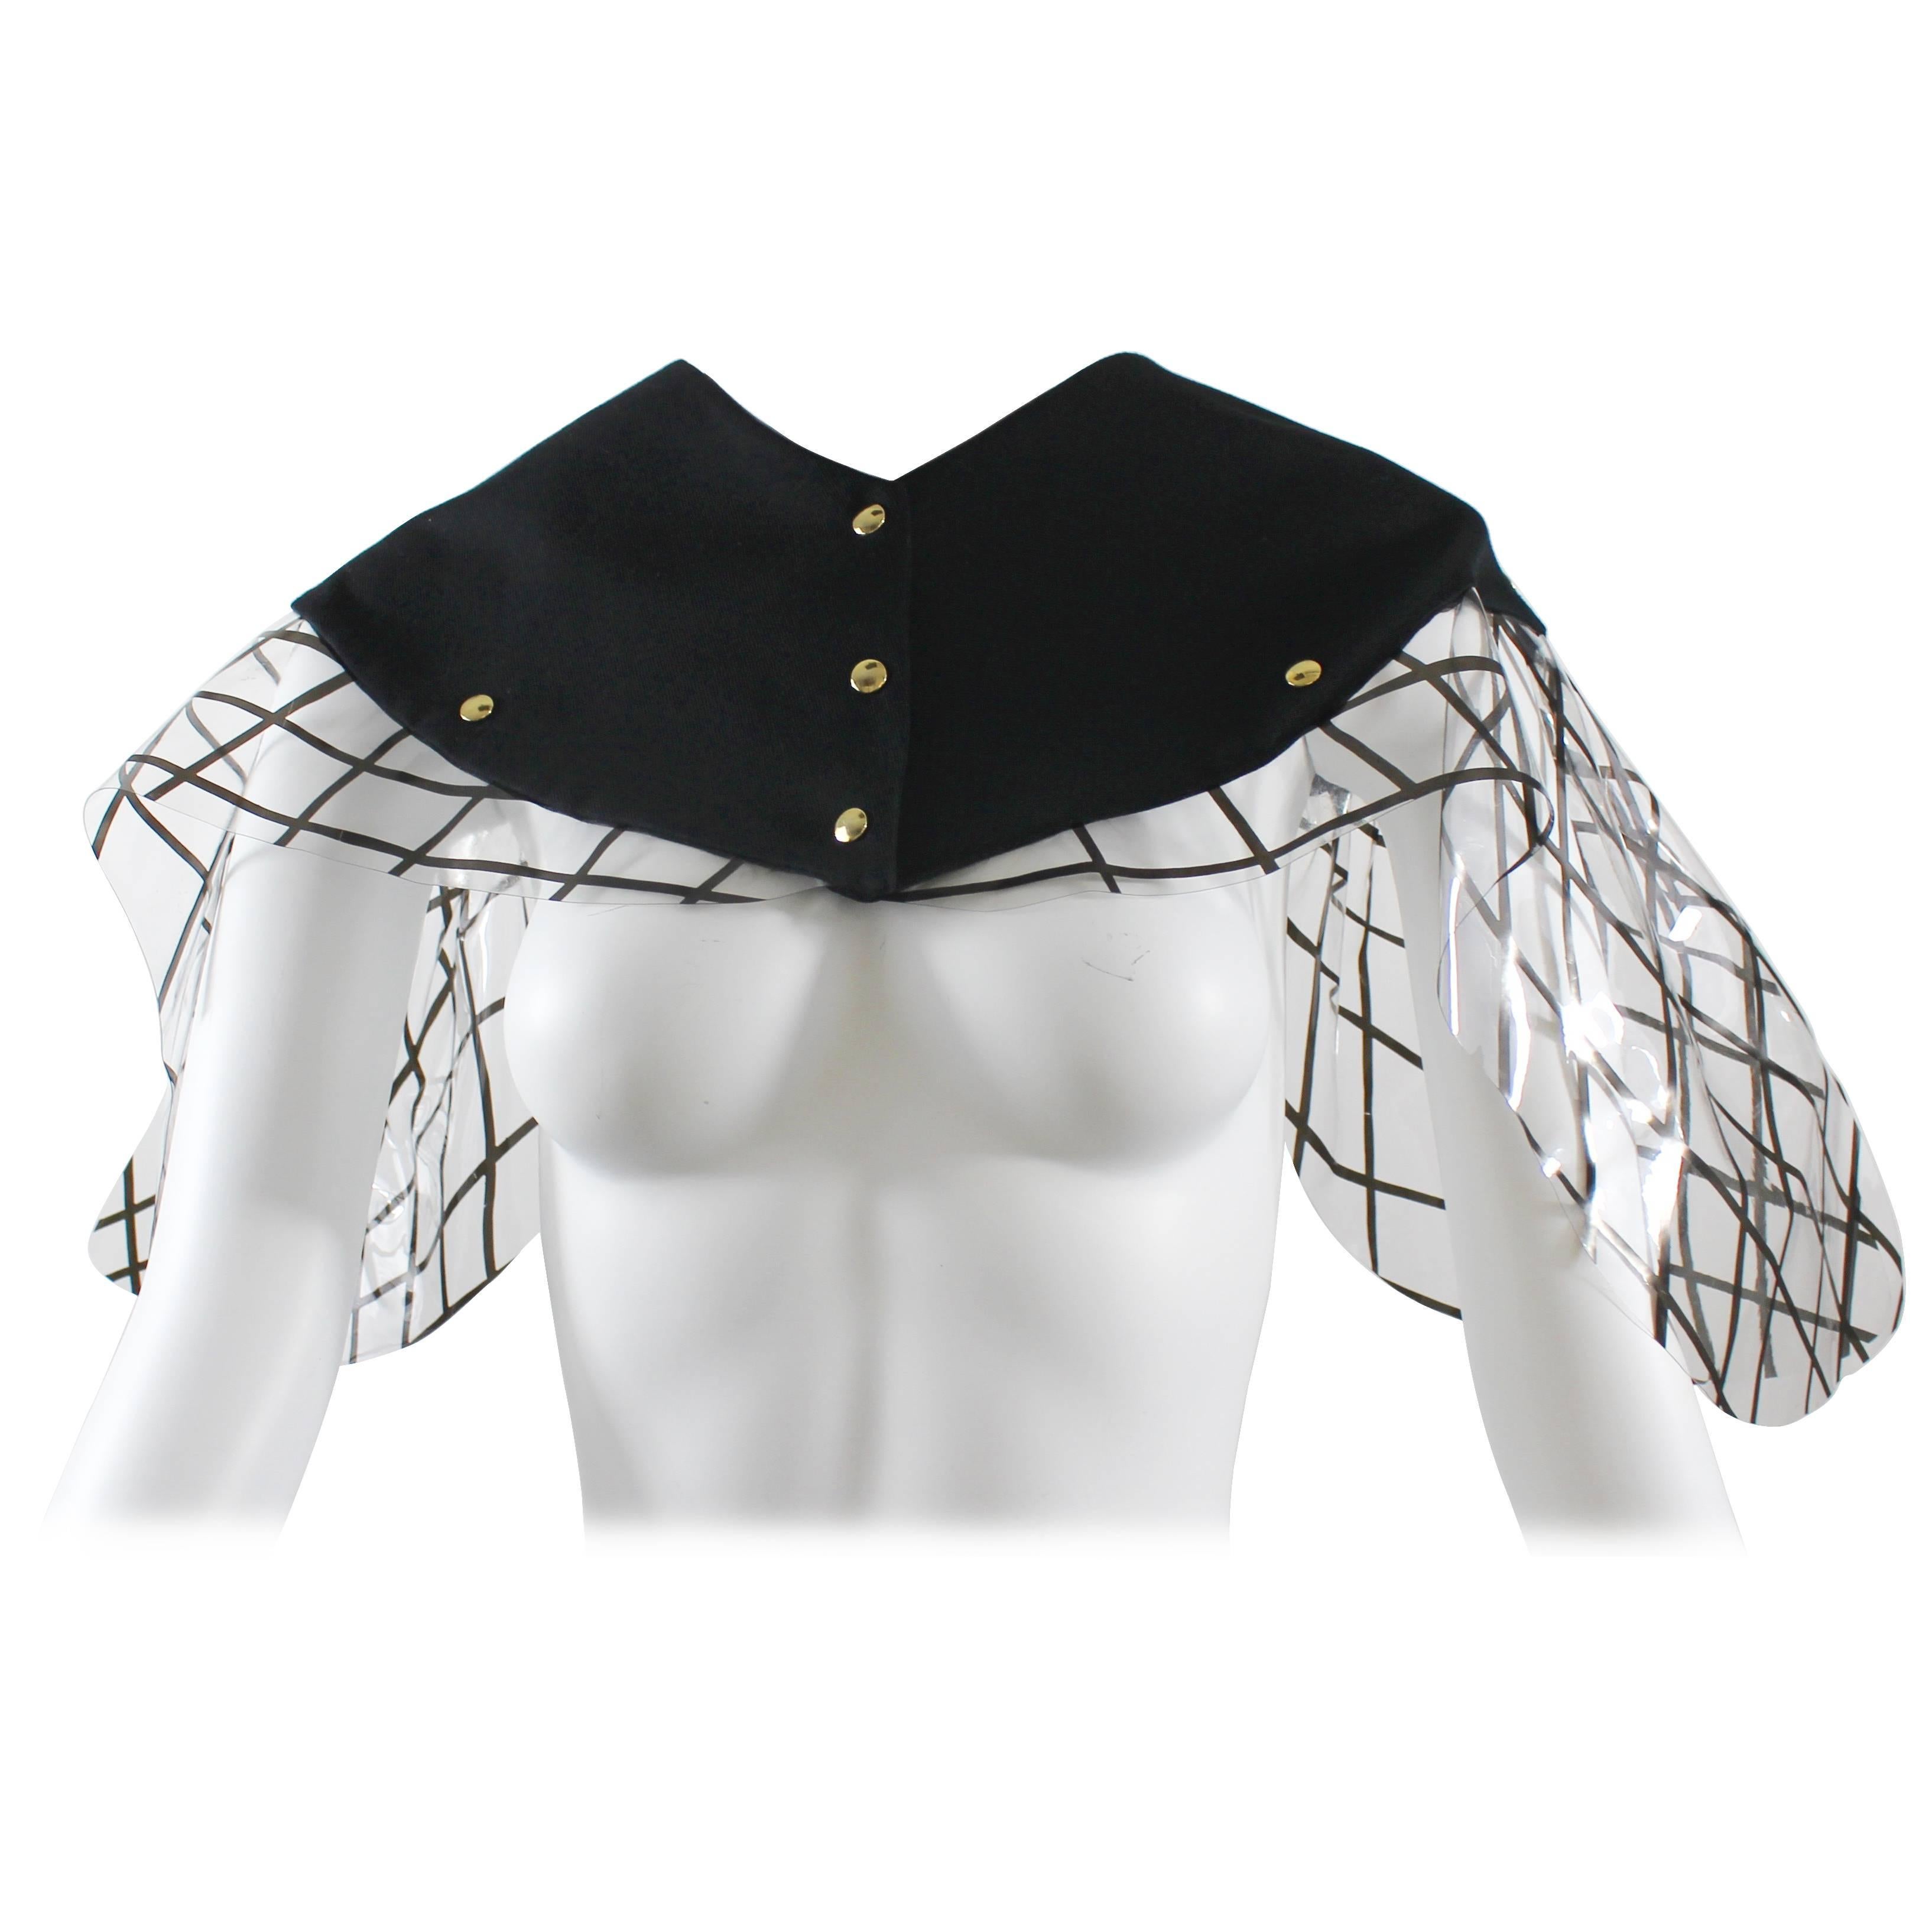 Yves Saint Laurent Black and Clear PVC Cape. Fall  2010 Runway Look #14  For Sale